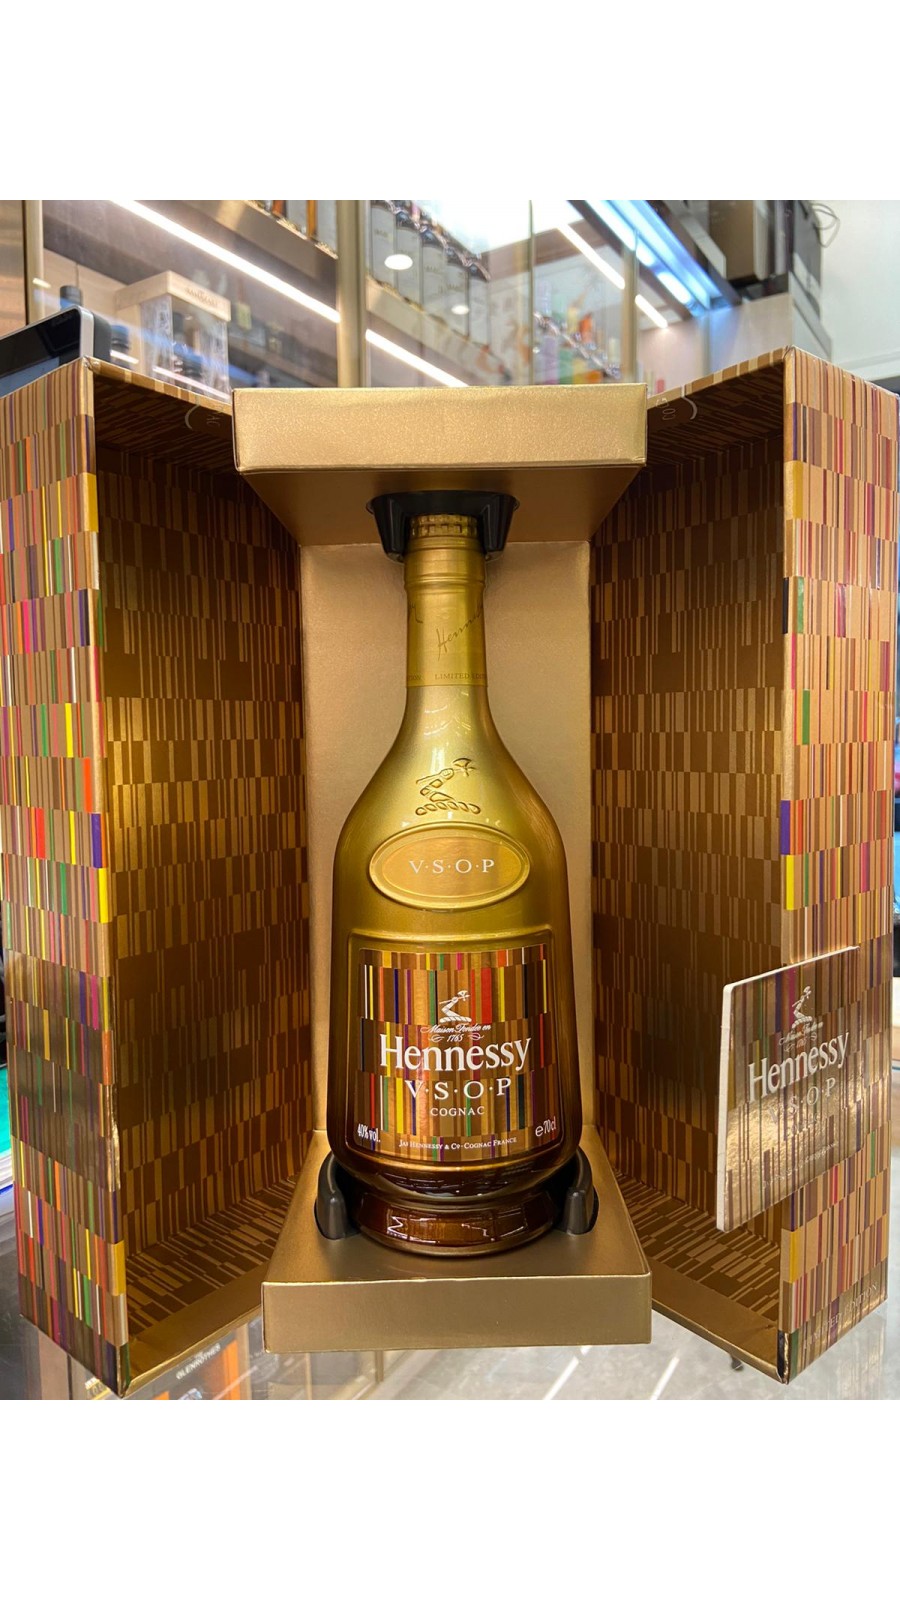 Hennessy VSOP Privilege Collection Edition 5 Cognac 700ml